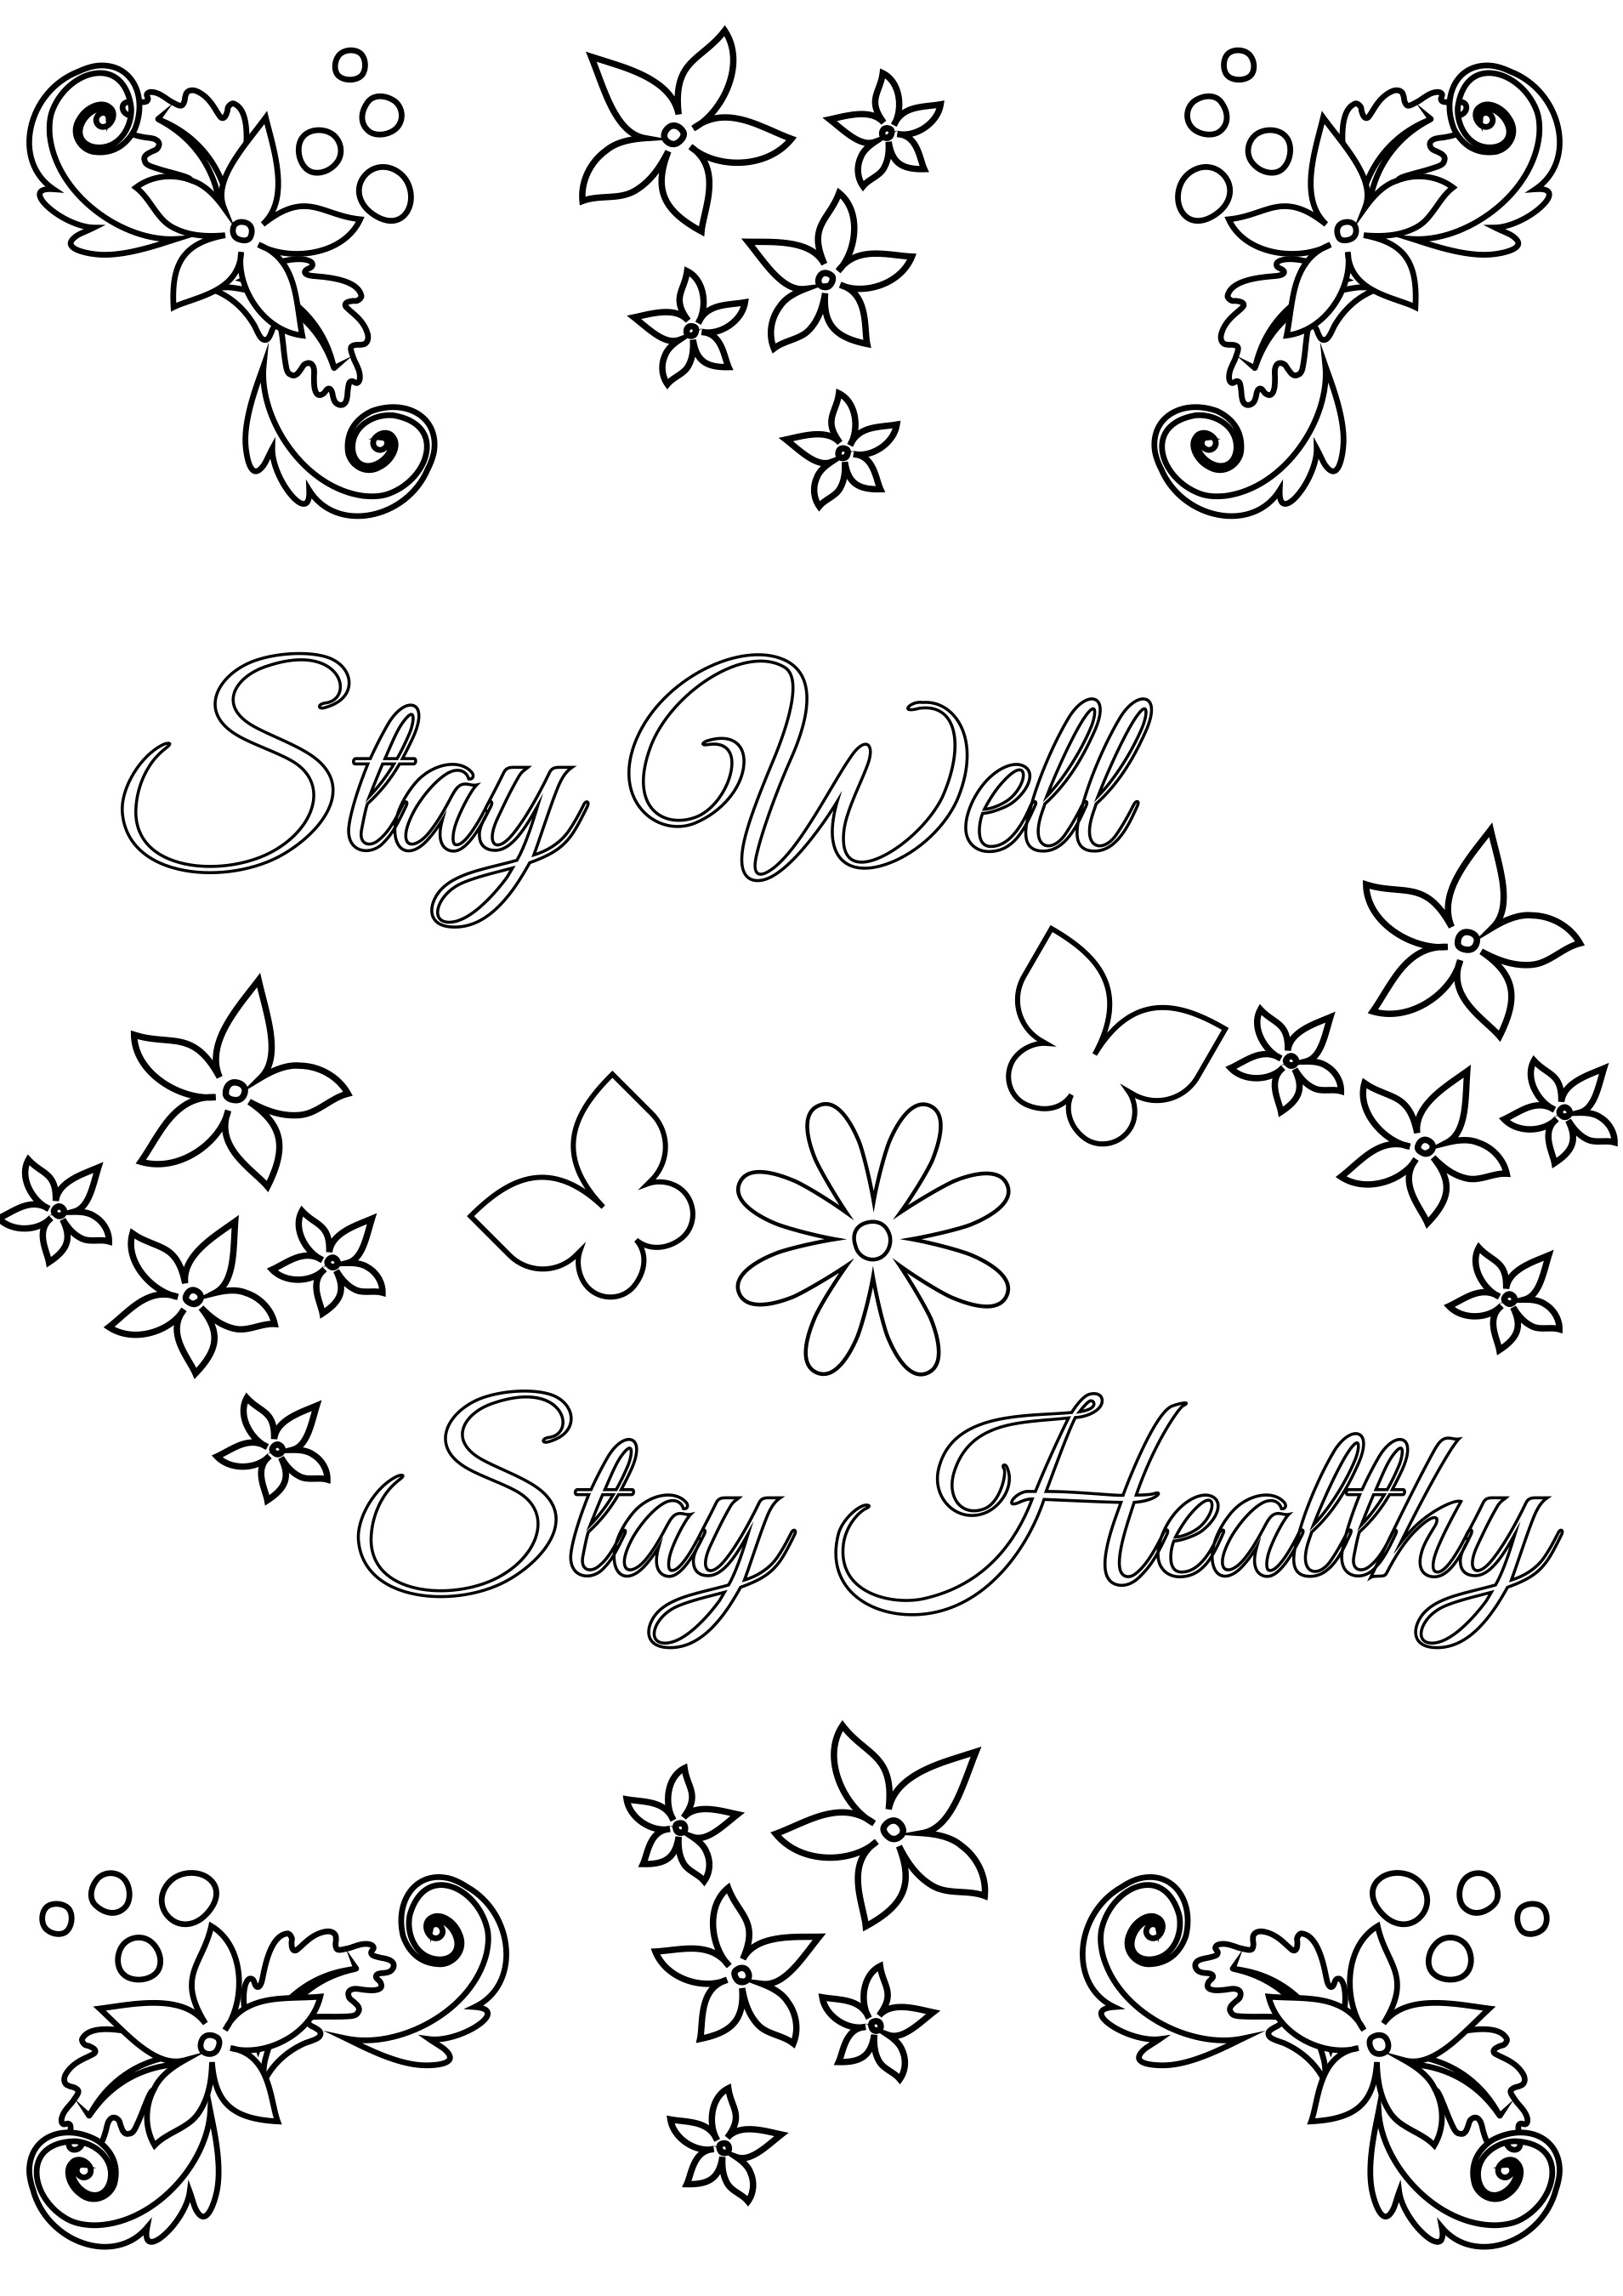 Stay Well Coloring Card